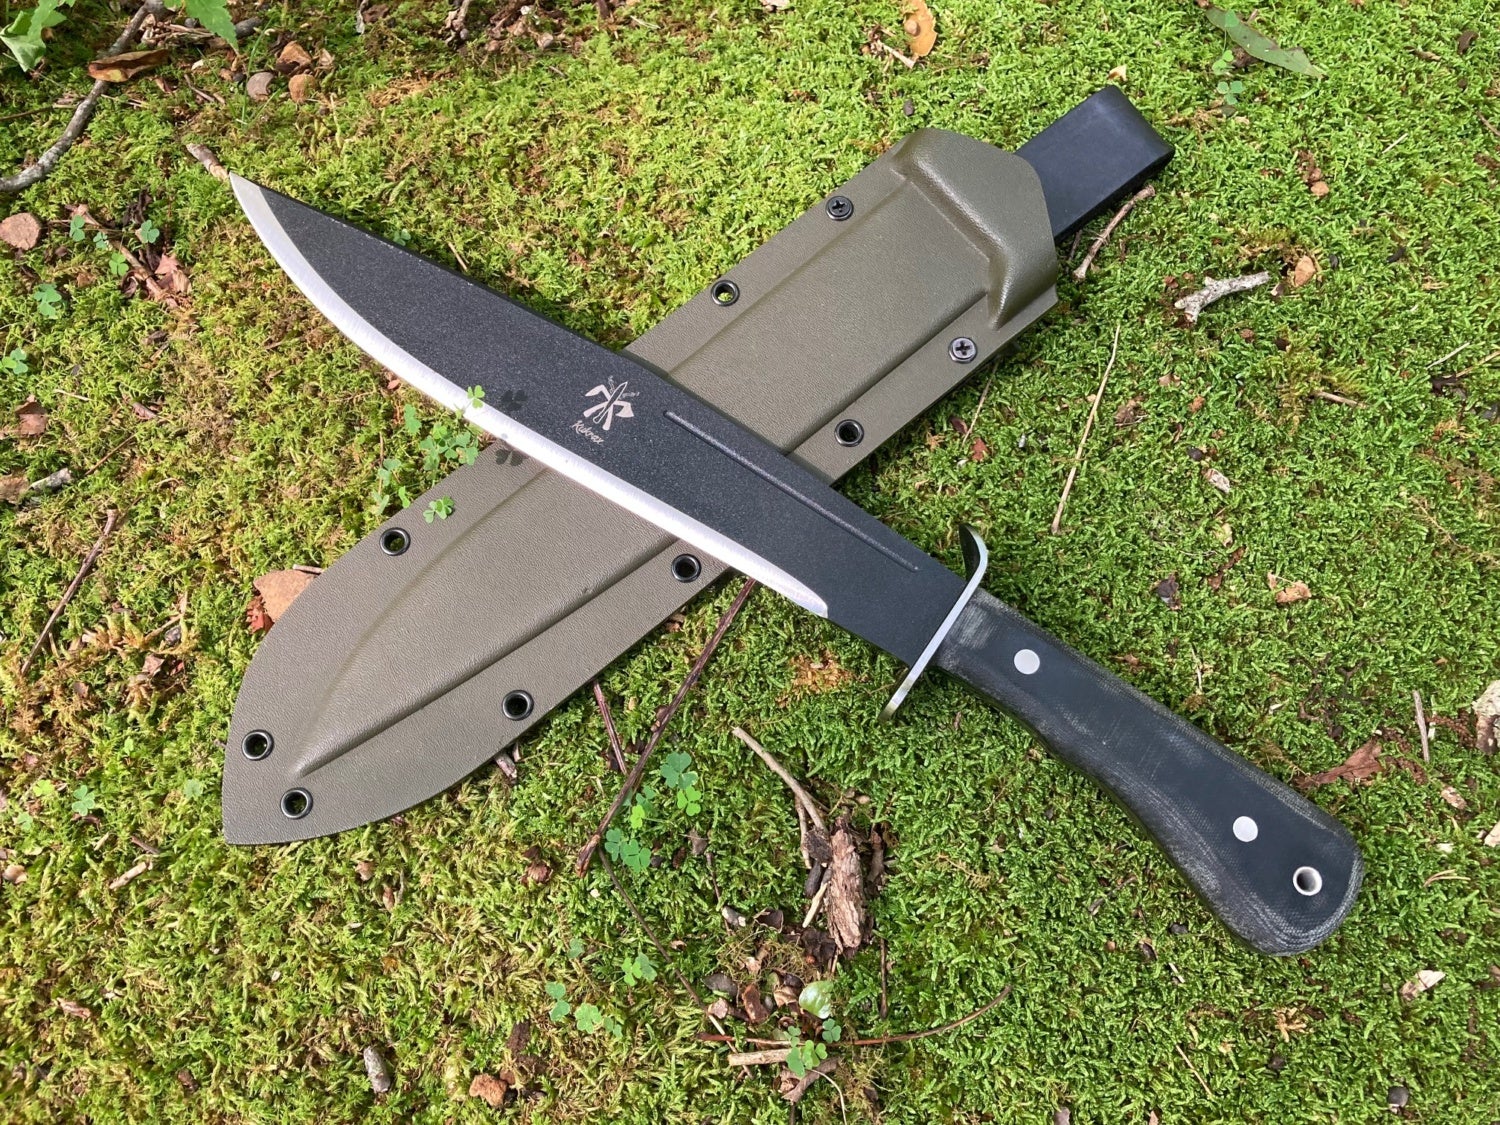 Kukrax Wildland Knives - The Straightened Kukri Is Now Available